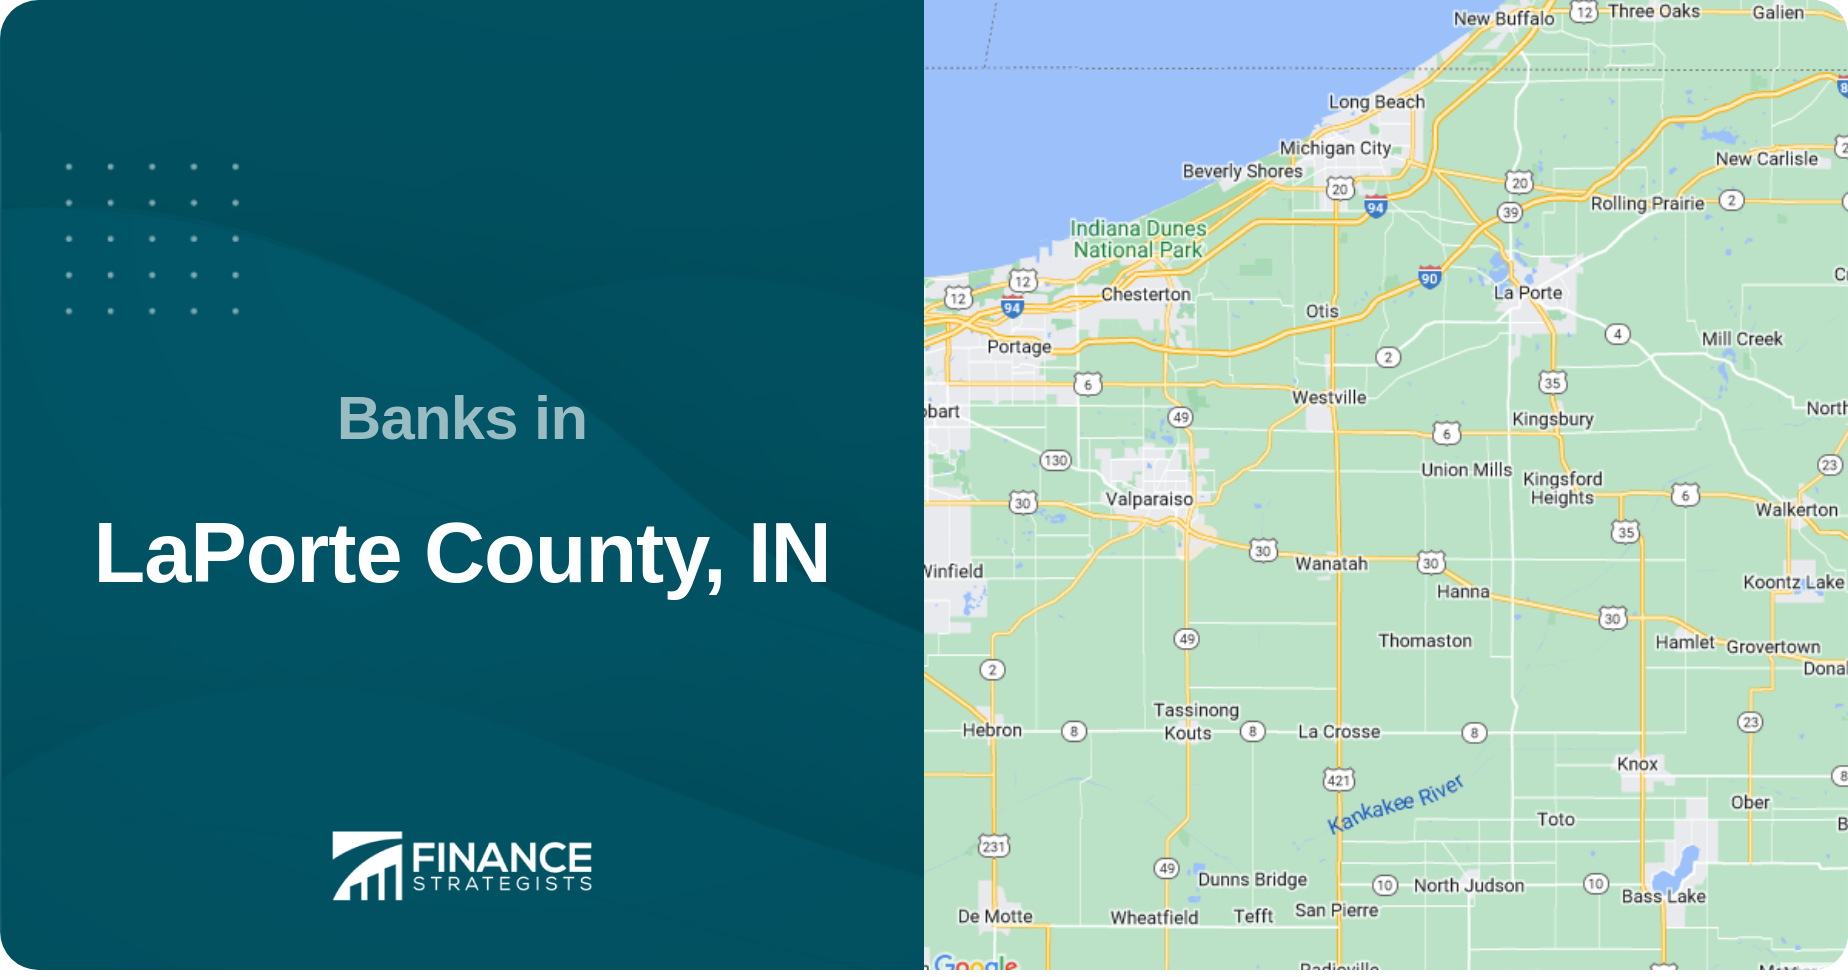 Banks in LaPorte County, IN